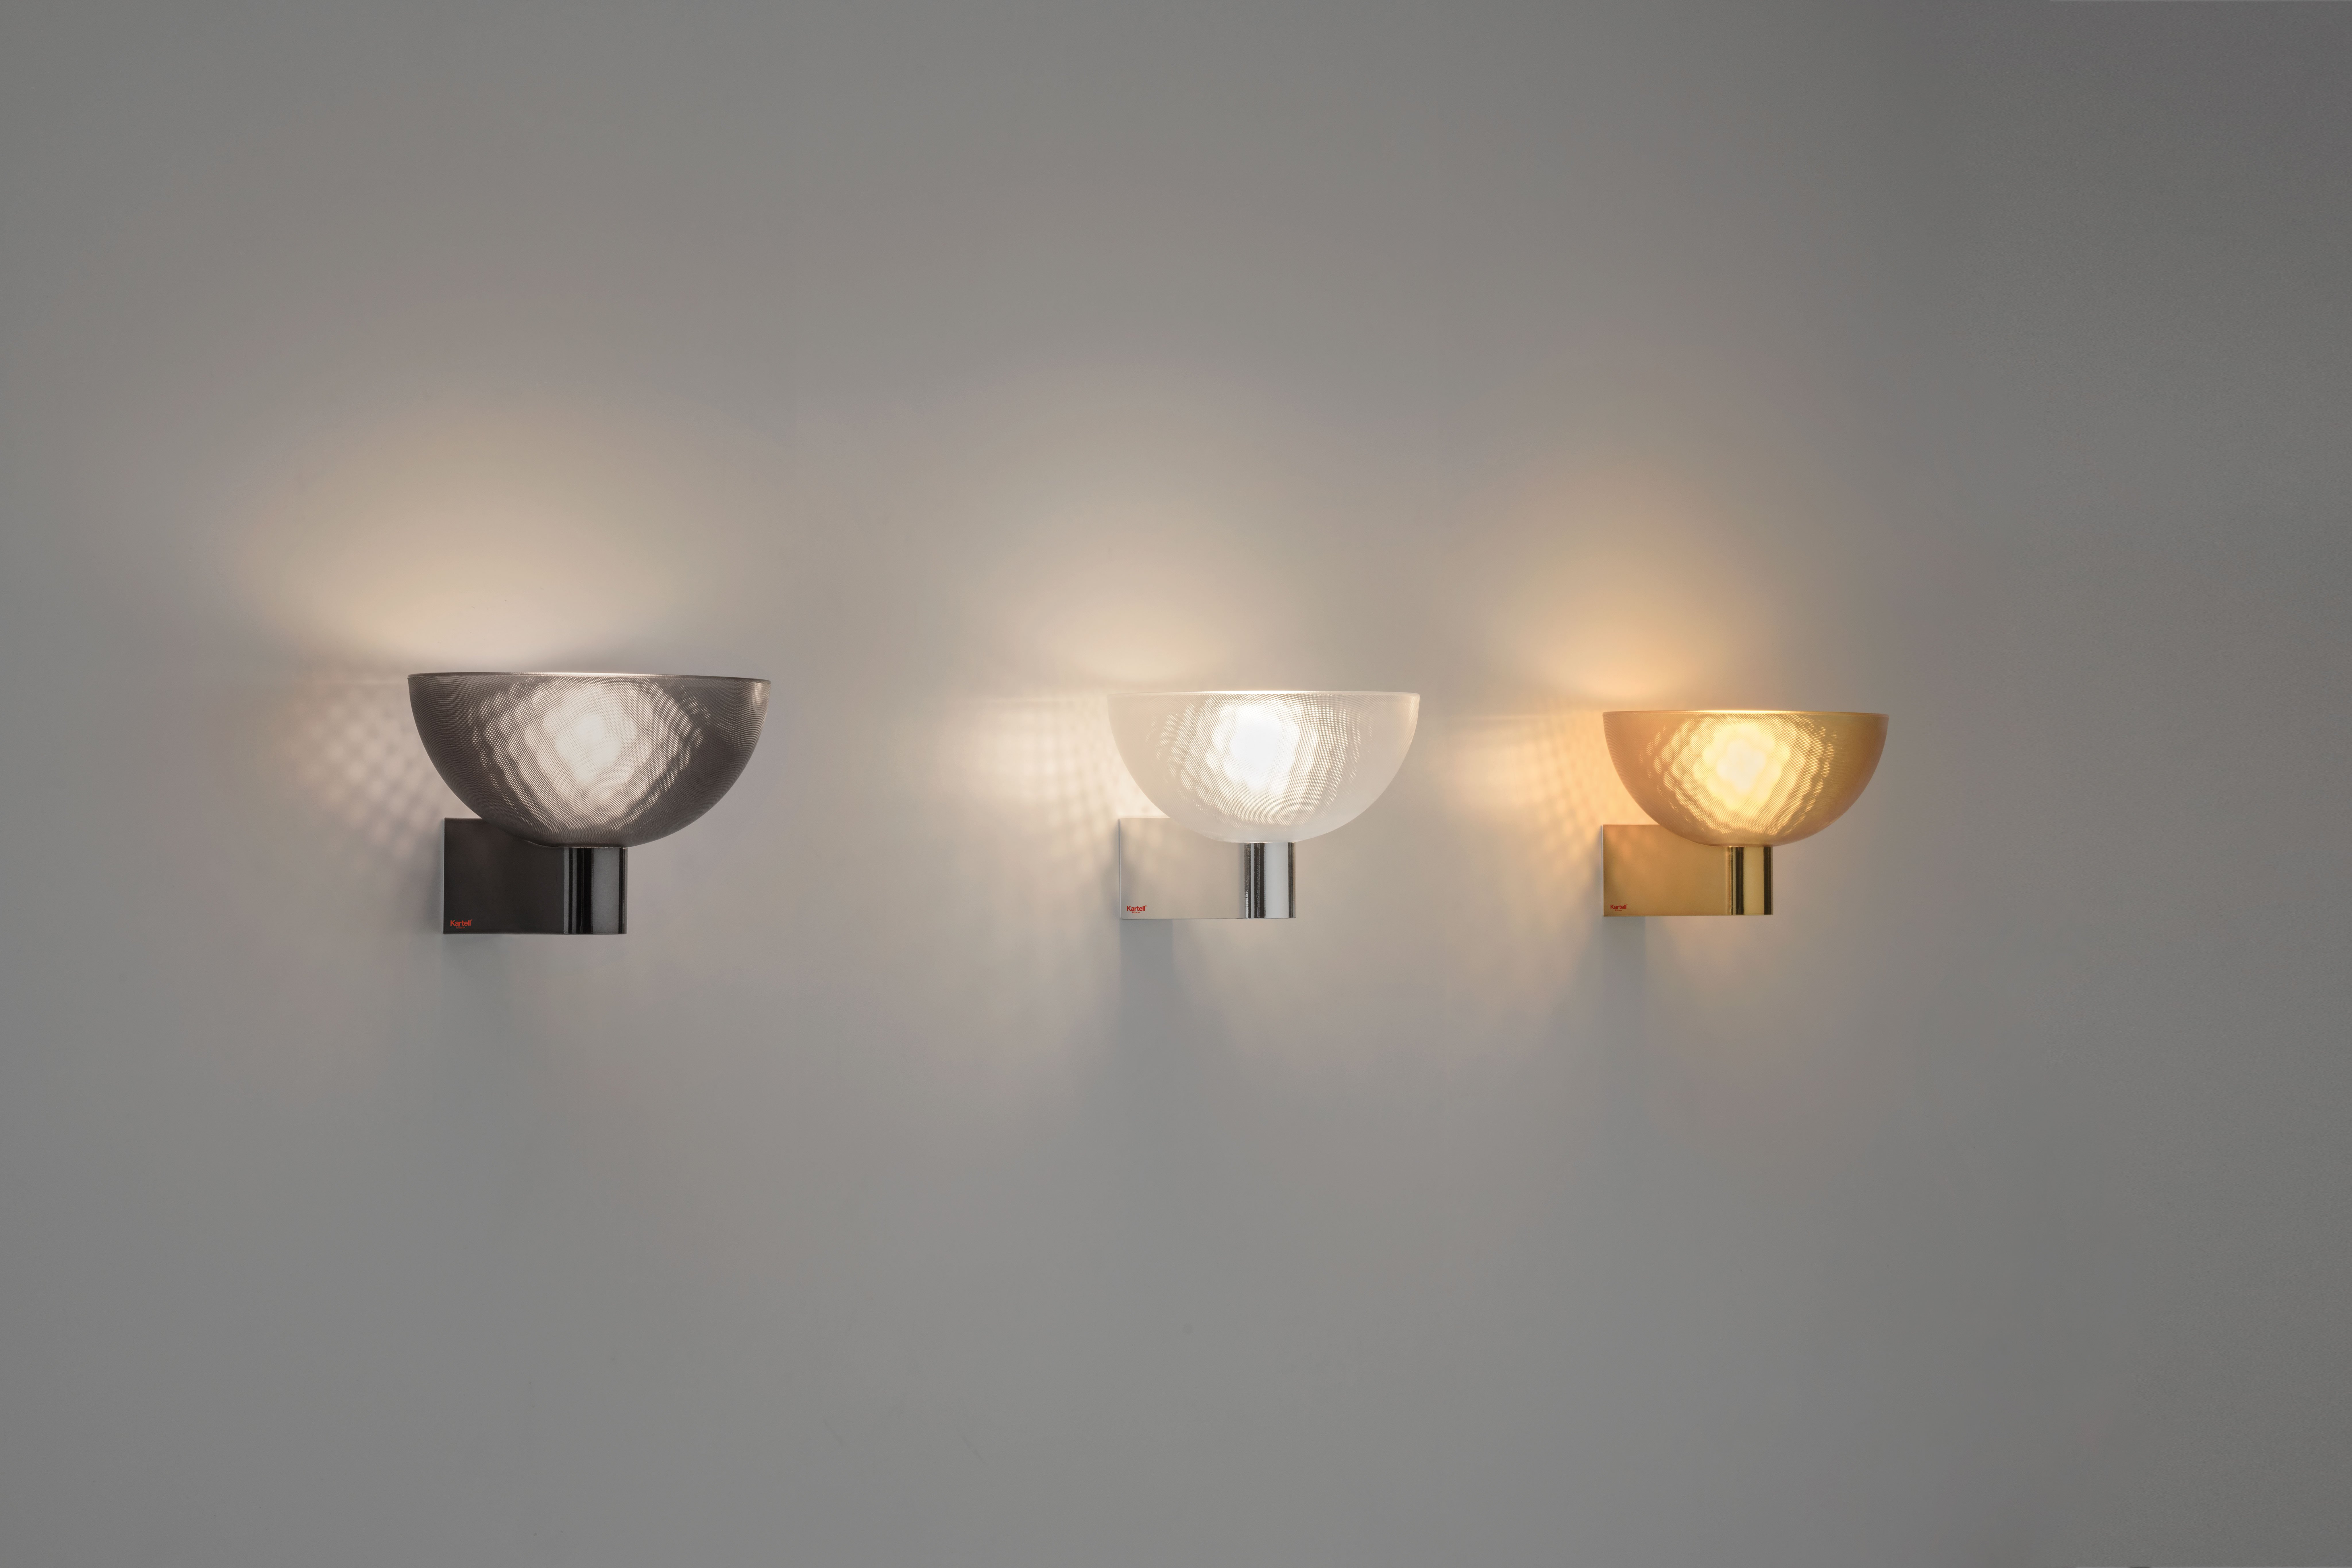 Fata Wall Lamp lighting from Kartell, designed by Piero Lissoni